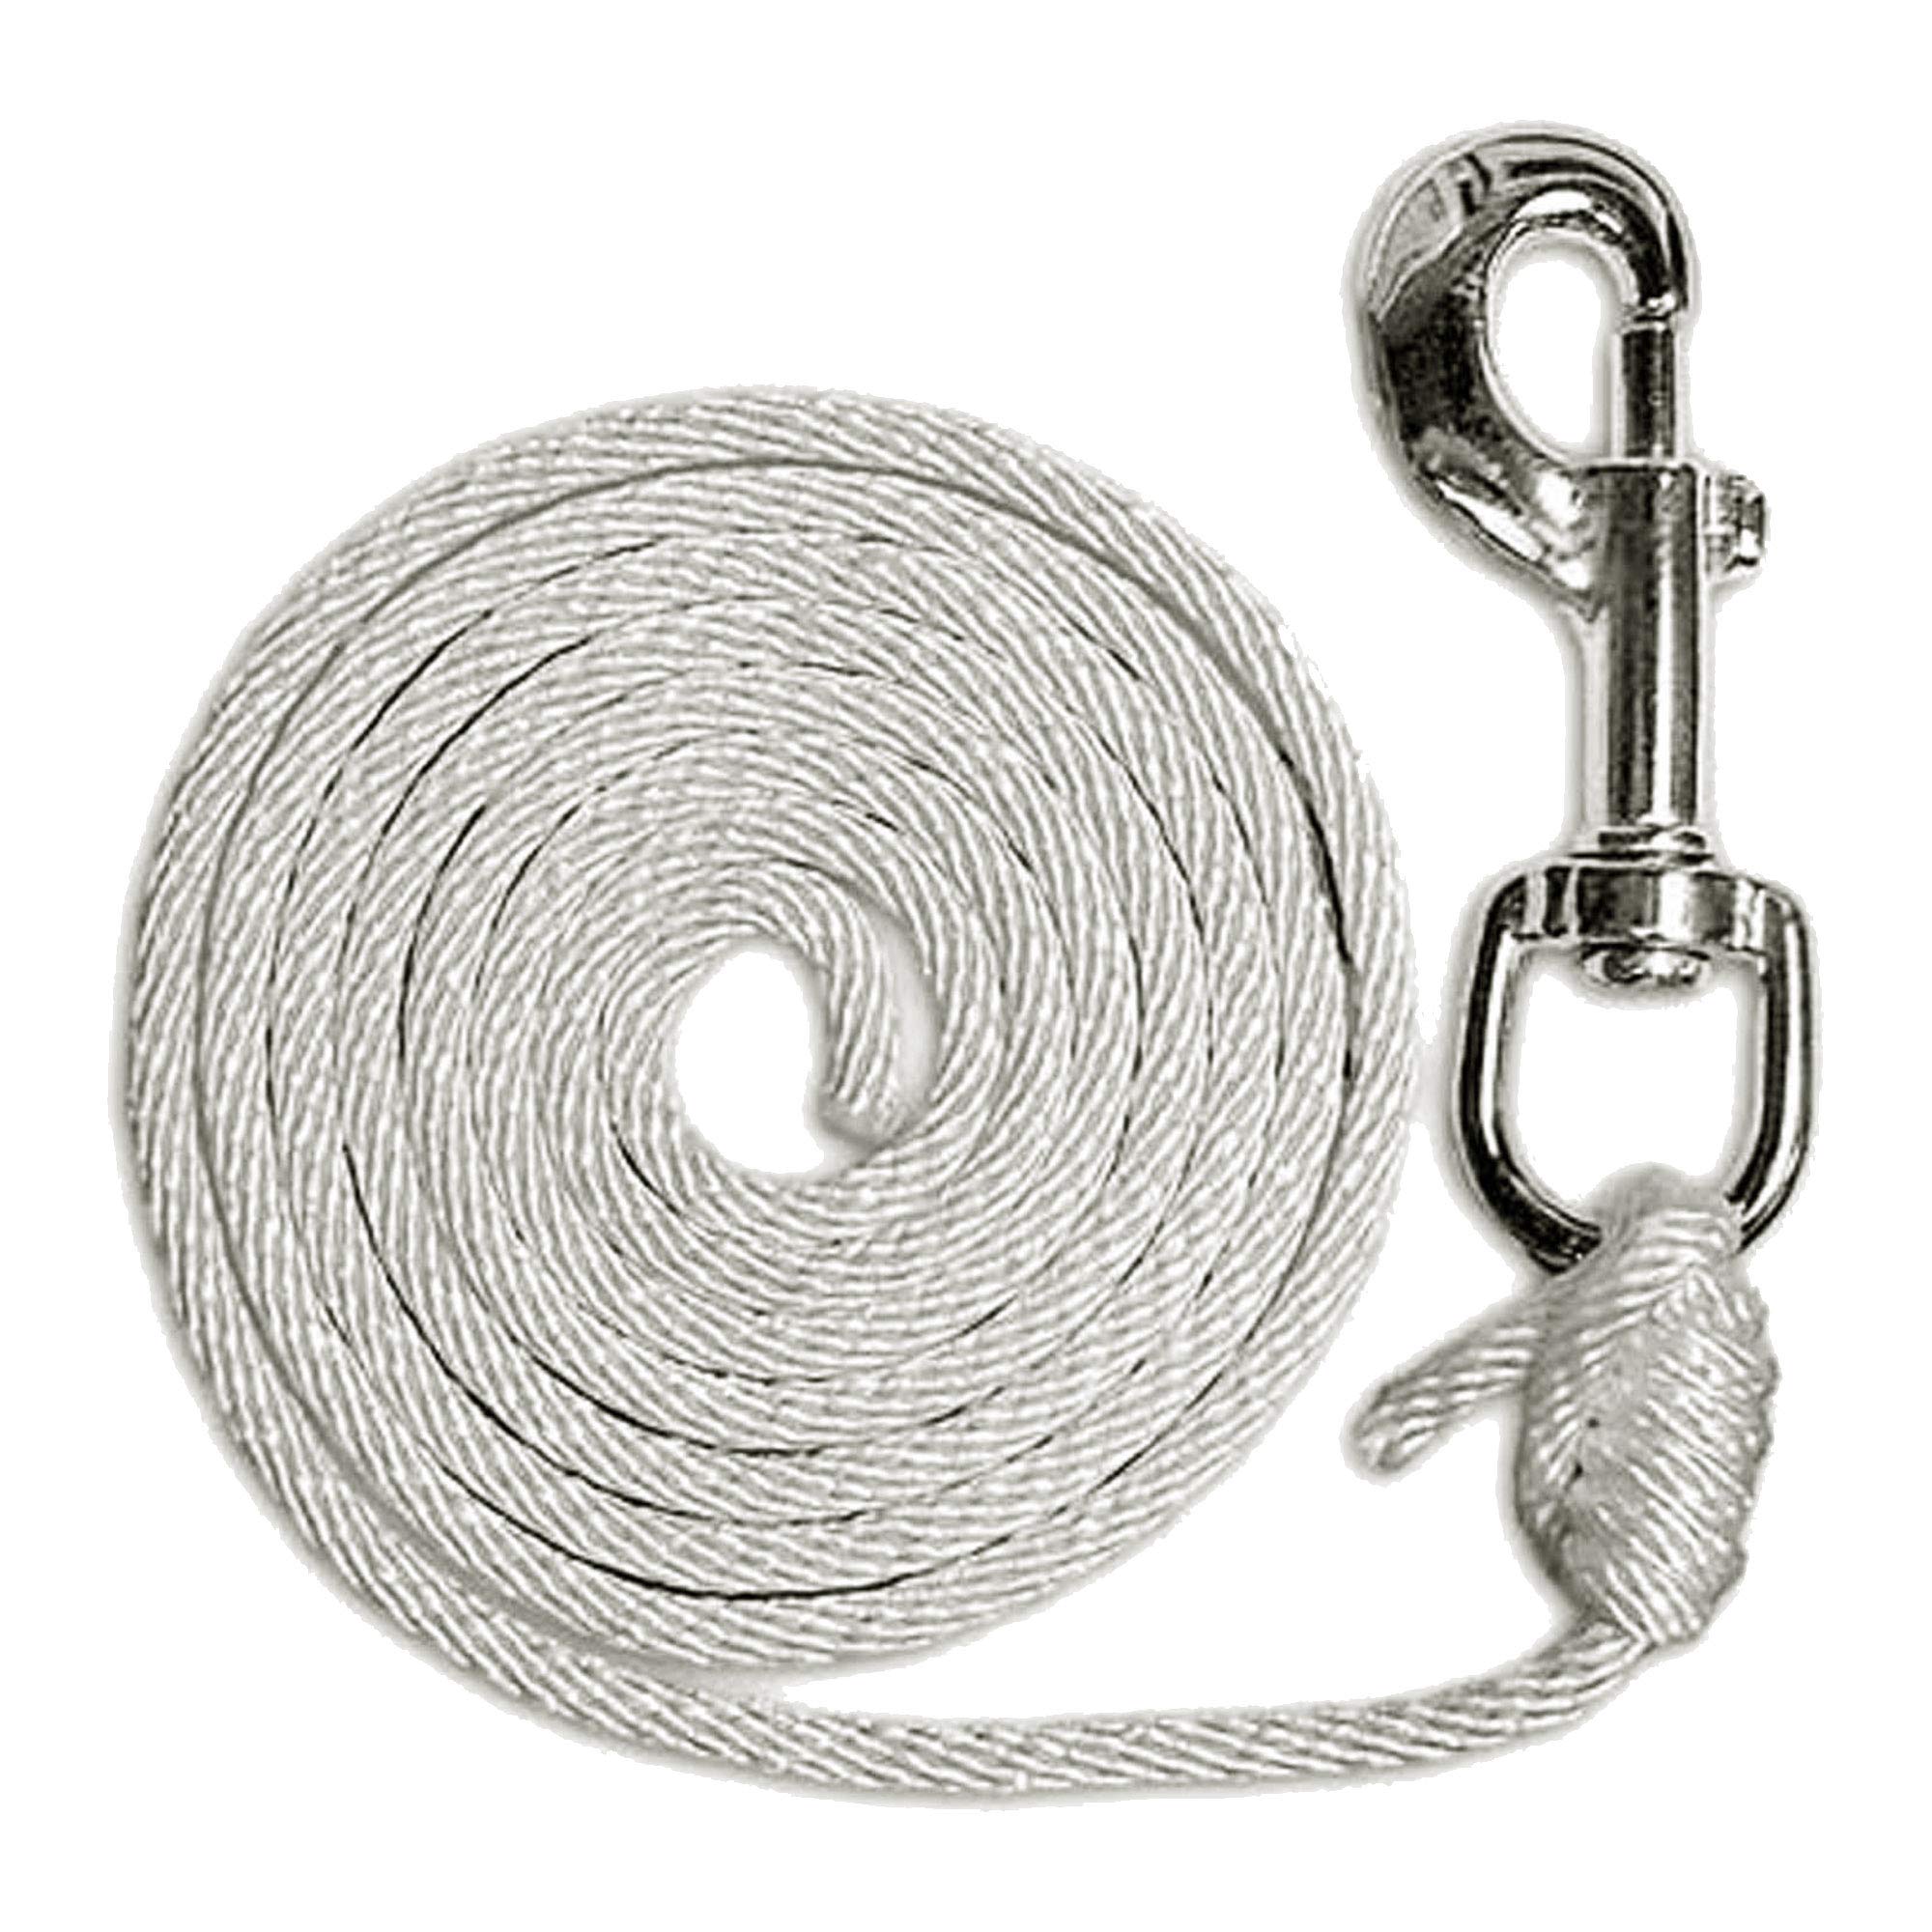 Cannon Sports Tetherball Rope and Clip Replacement for Outdoor